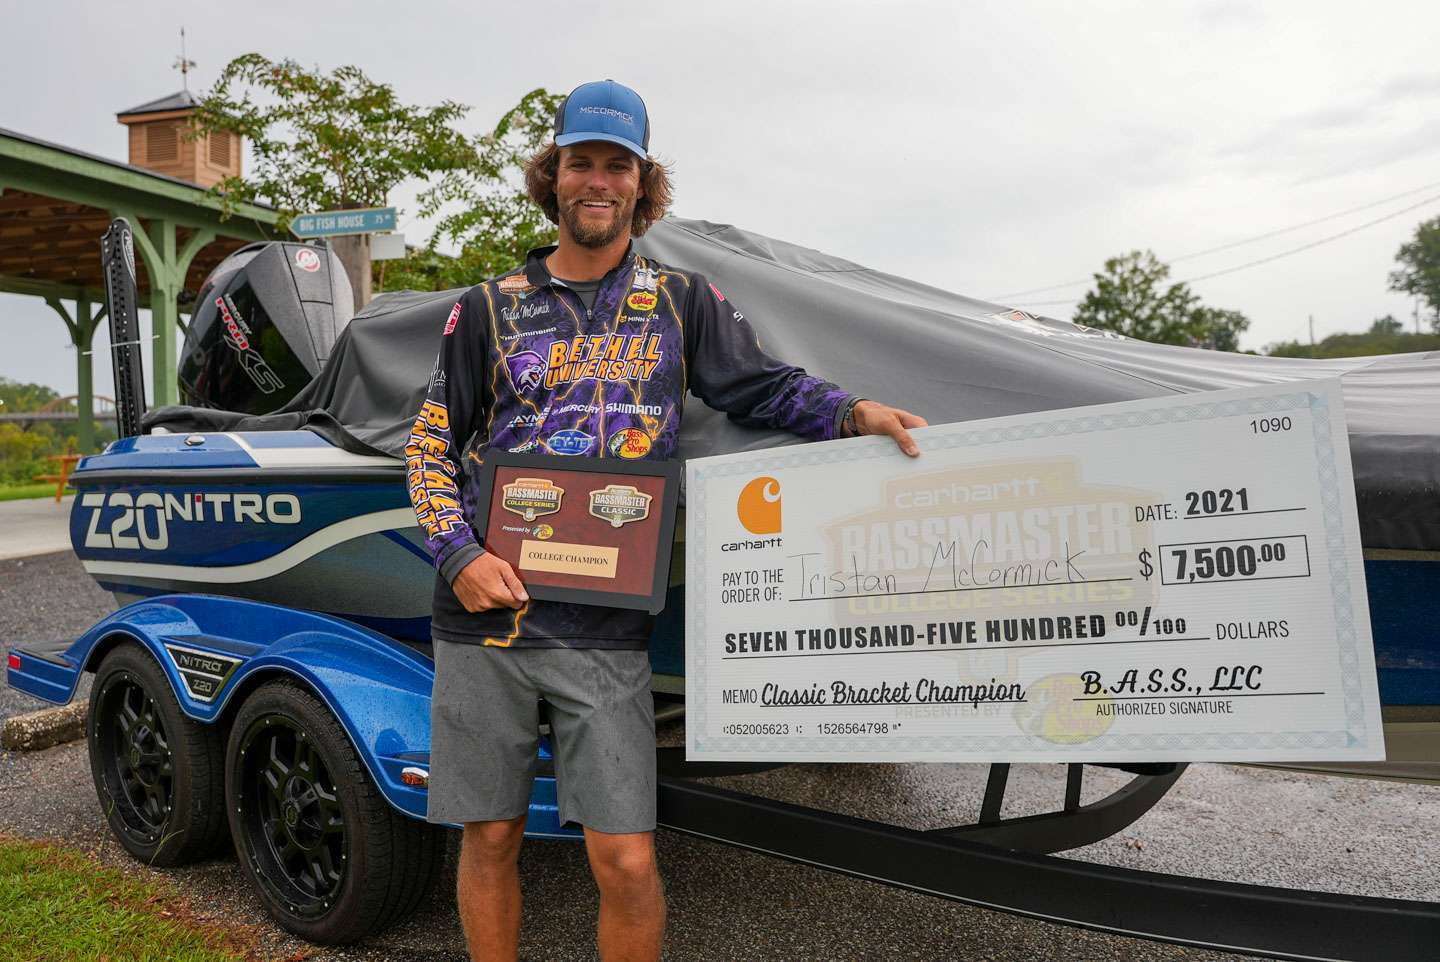 
 
<figcaption>McCormick poses with his brand new Nitro Bass Boat and prize money from the 2021 Bassmaster College Bracket. </figcaption>” class=”wp-image-566919″/><figcaption>McCormick poses with his brand new Nitro Bass Boat and prize money from the 2021 Bassmaster College Bracket. </figcaption></figure>
<p>In addition to qualifying for the 2022 Academy Sports + Outdoors Bassmaster Classic presented by Huk, McCormick also received free entries into all nine 2022 St. Croix Bassmaster Opens, use of a brand-new Nitro Bass boat and a Toyota Tundra to travel across the country. Since winning the Bracket, the Tennessee native has spent his time crossing his t’s and dotting his i’s in preparation of the Classic as well as the Opens season.</p>
<p>“I just got my boat in not too long ago, so I’ve been doing a lot of rigging before heading down to Florida,” he said. “This has been a dream come true, and I can’t wait to get the season started.”</p>
<p>The 2022 Academy Sports + Outdoors Bassmaster Classic presented by Huk is right around the corner, and it’s starting to set in for McCormick that he will be accomplishing a lifelong dream of fishing the Classic. Although the 24-year-old is thrilled to be fishing the Classic, he’s not satisfied with just being there.</p>
<div class=